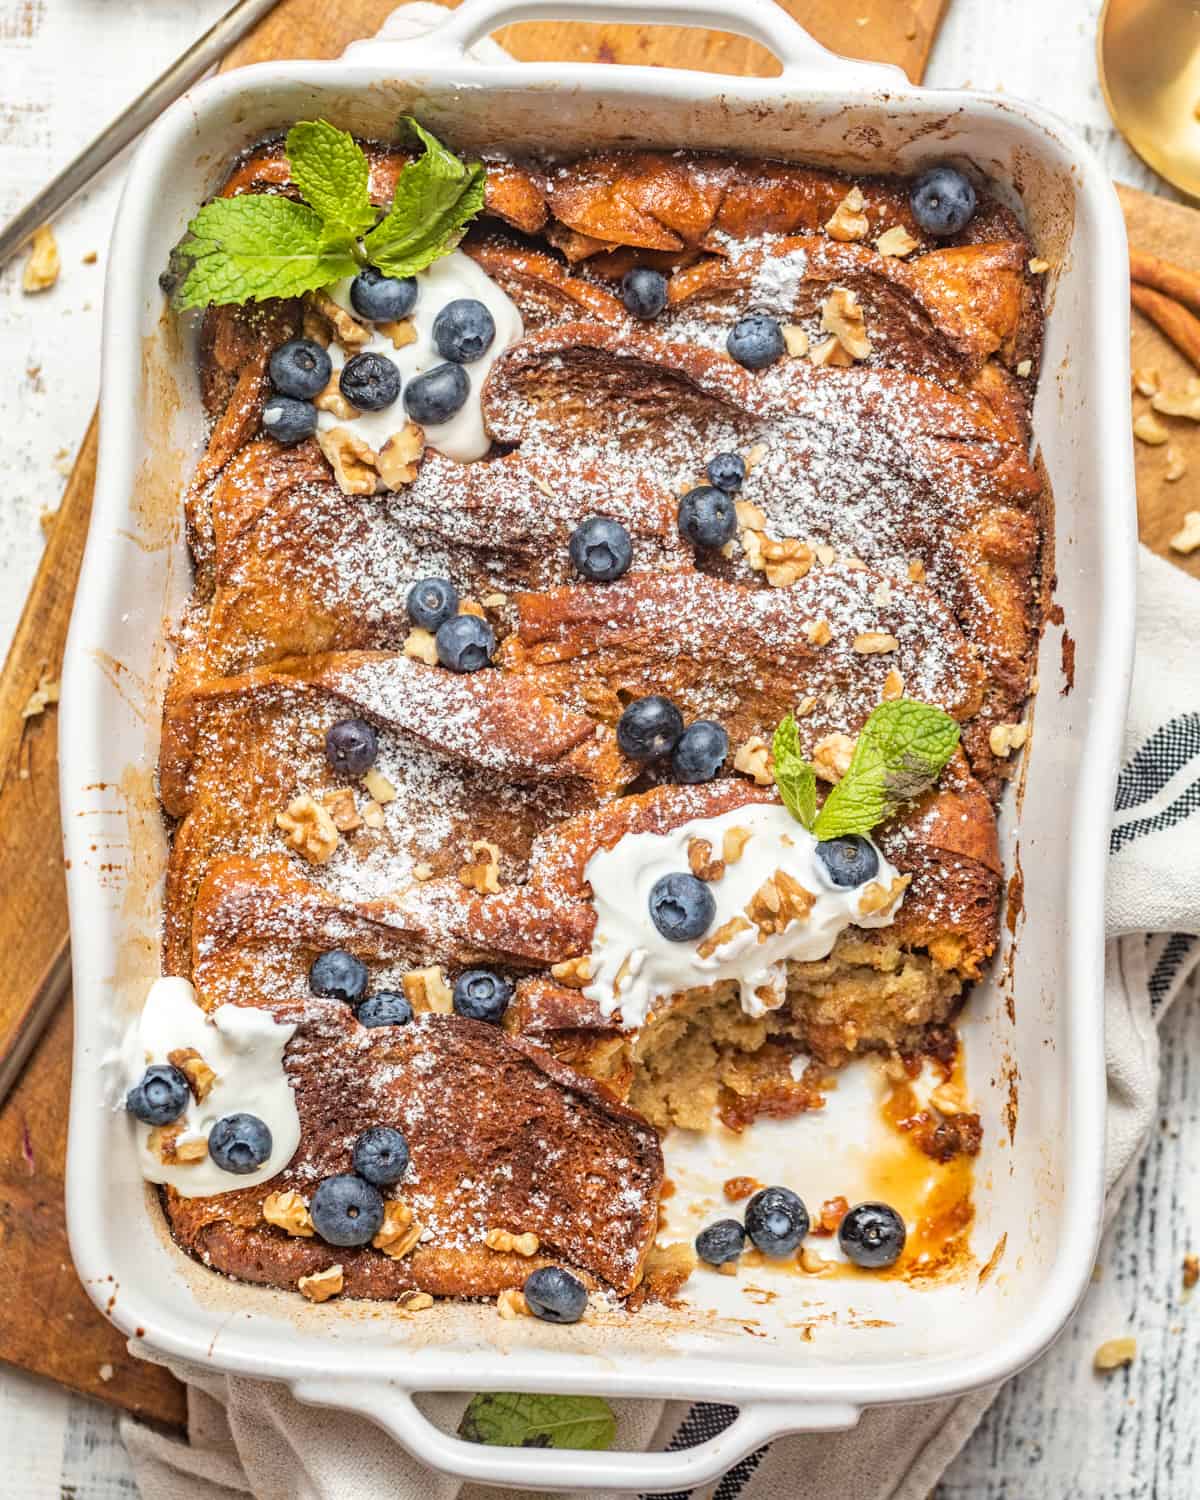 brioche french toast casserole in a baking dish topped with blueberries and whipped cream.